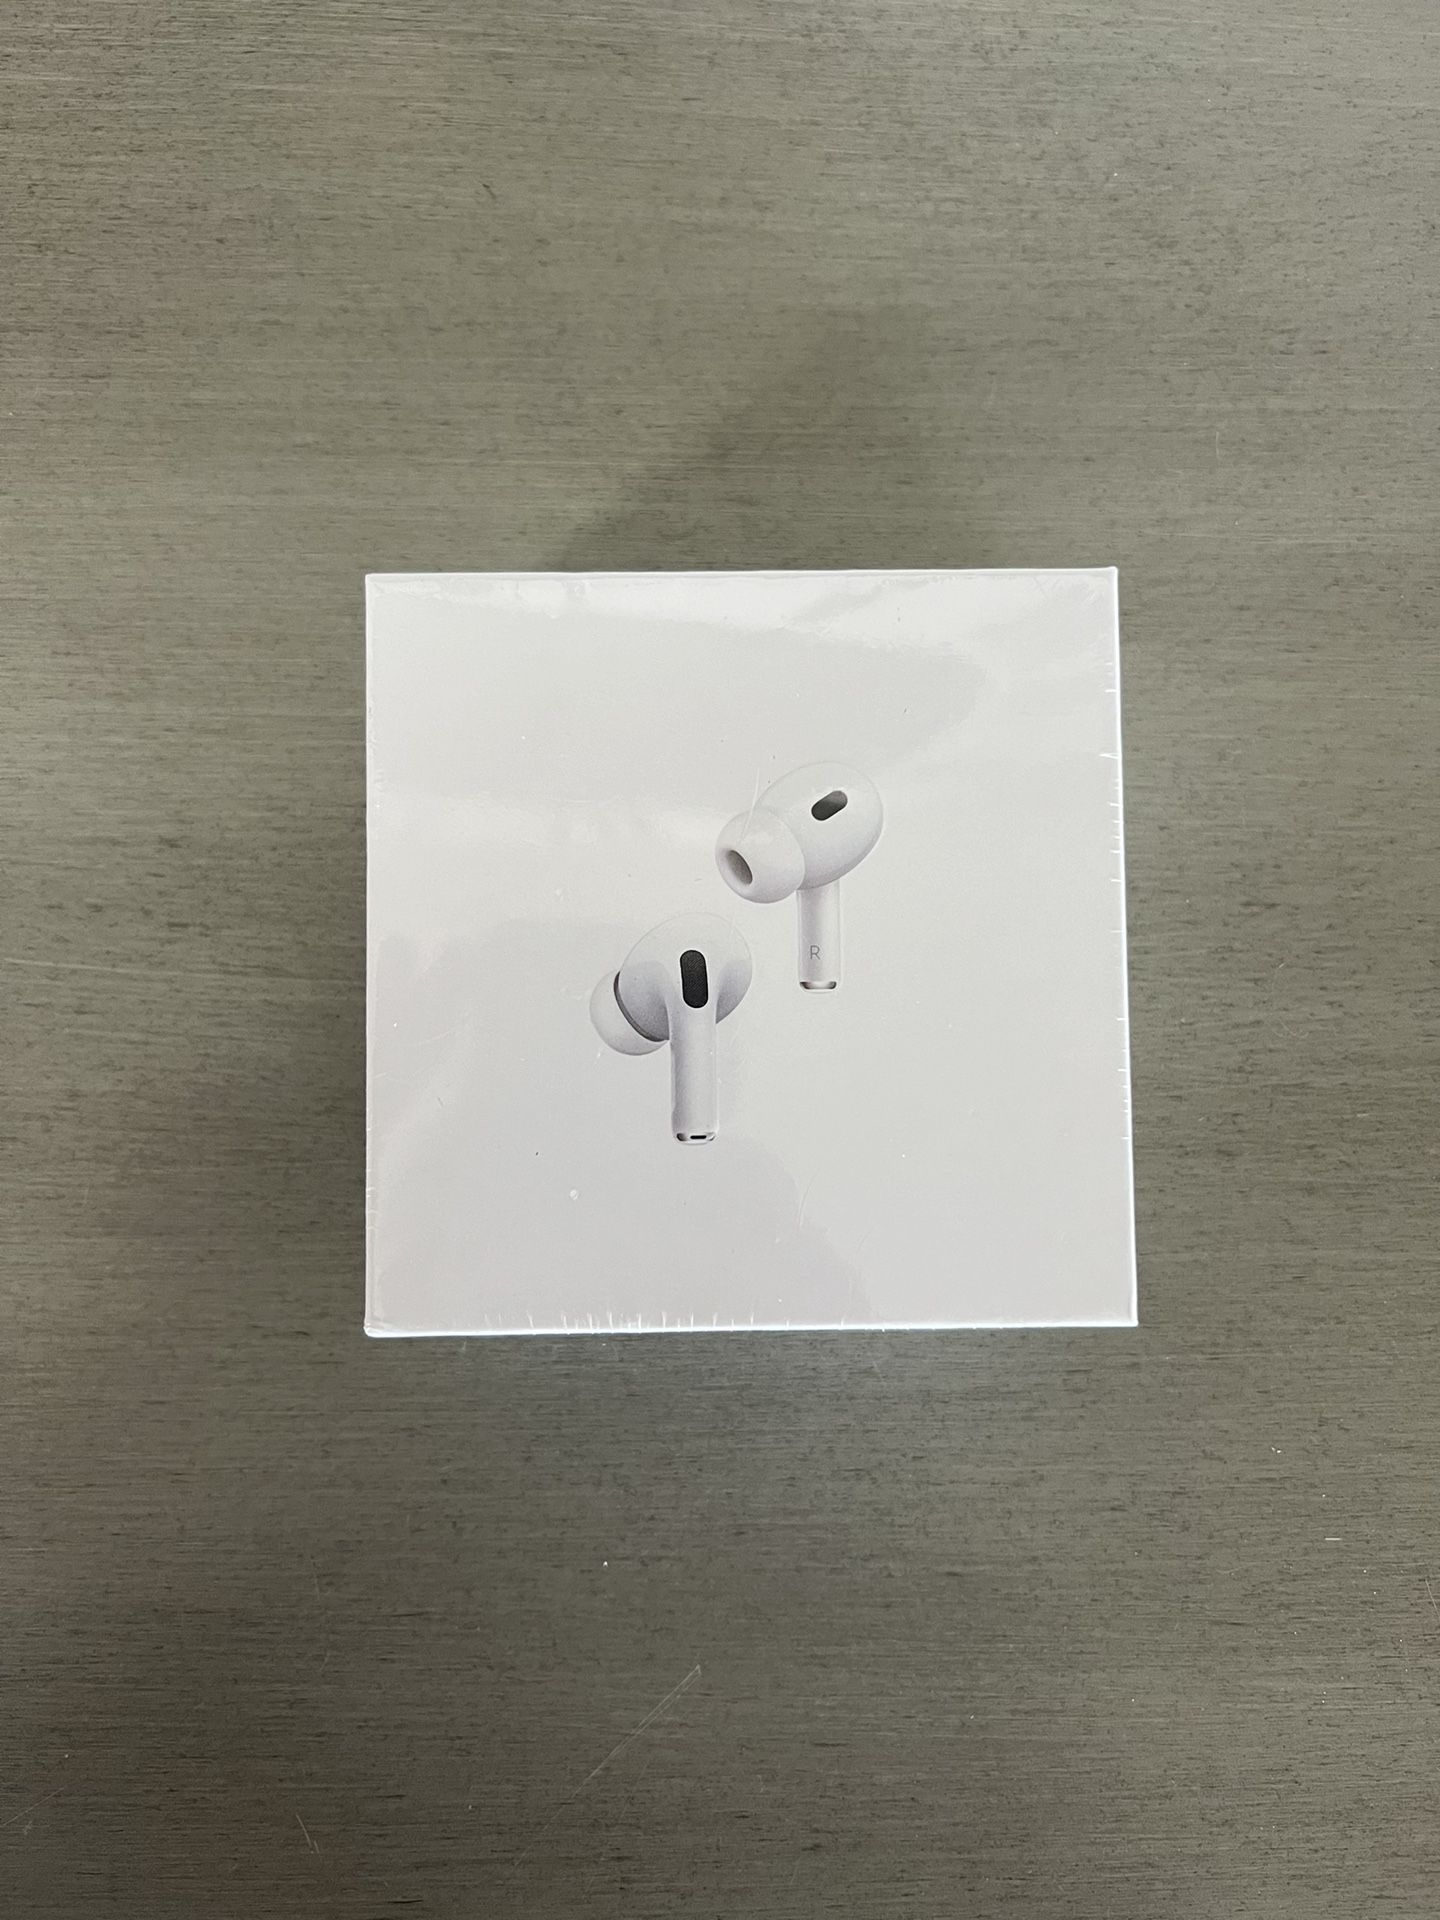 Airpod Pros 2nd Generation with Charging Case - Brand new